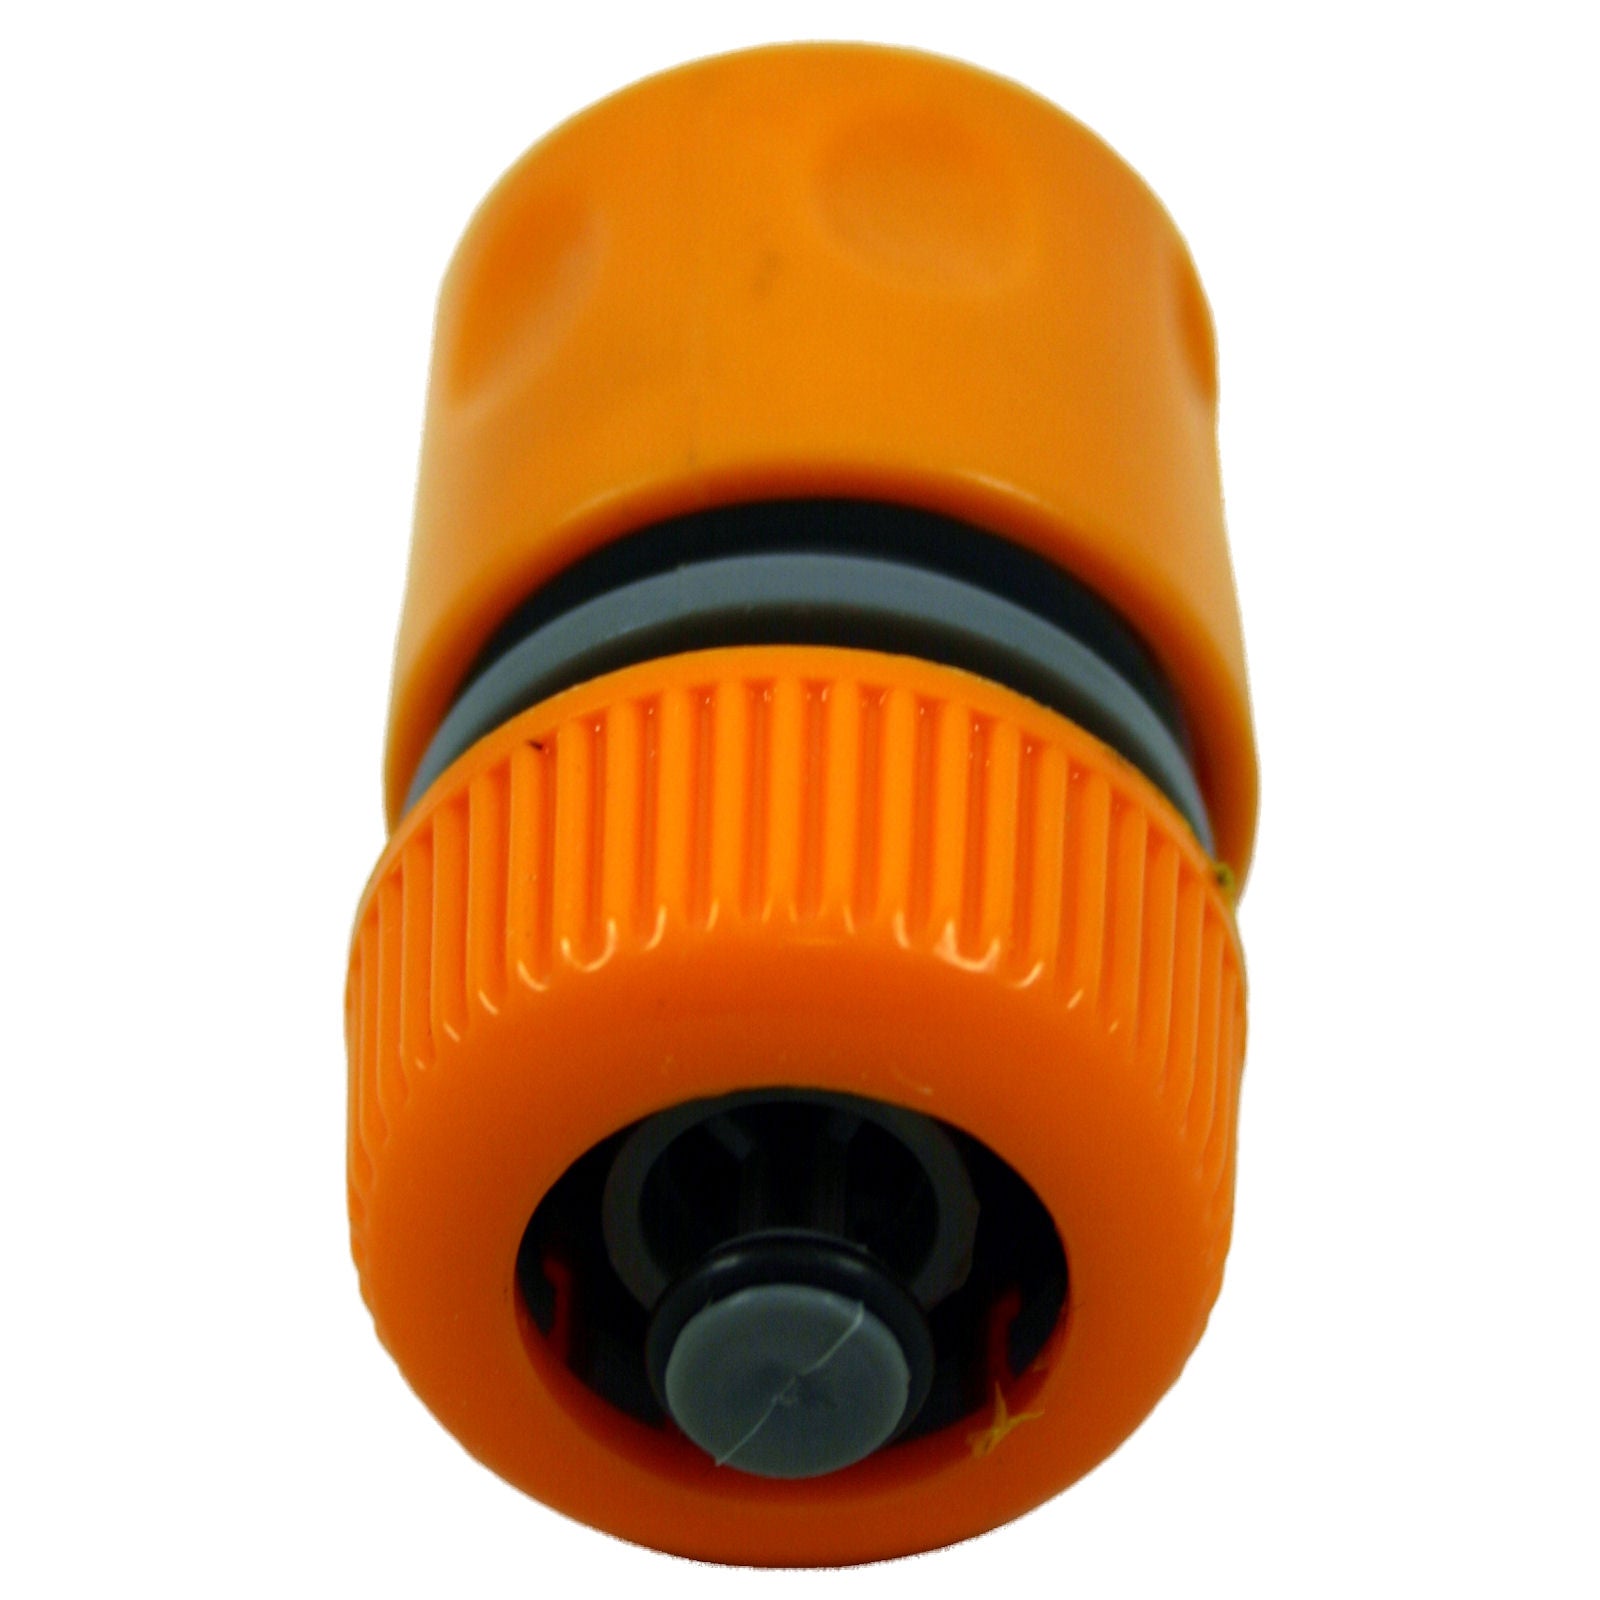 Amtech 1/2" Hose Connector with Shut Off